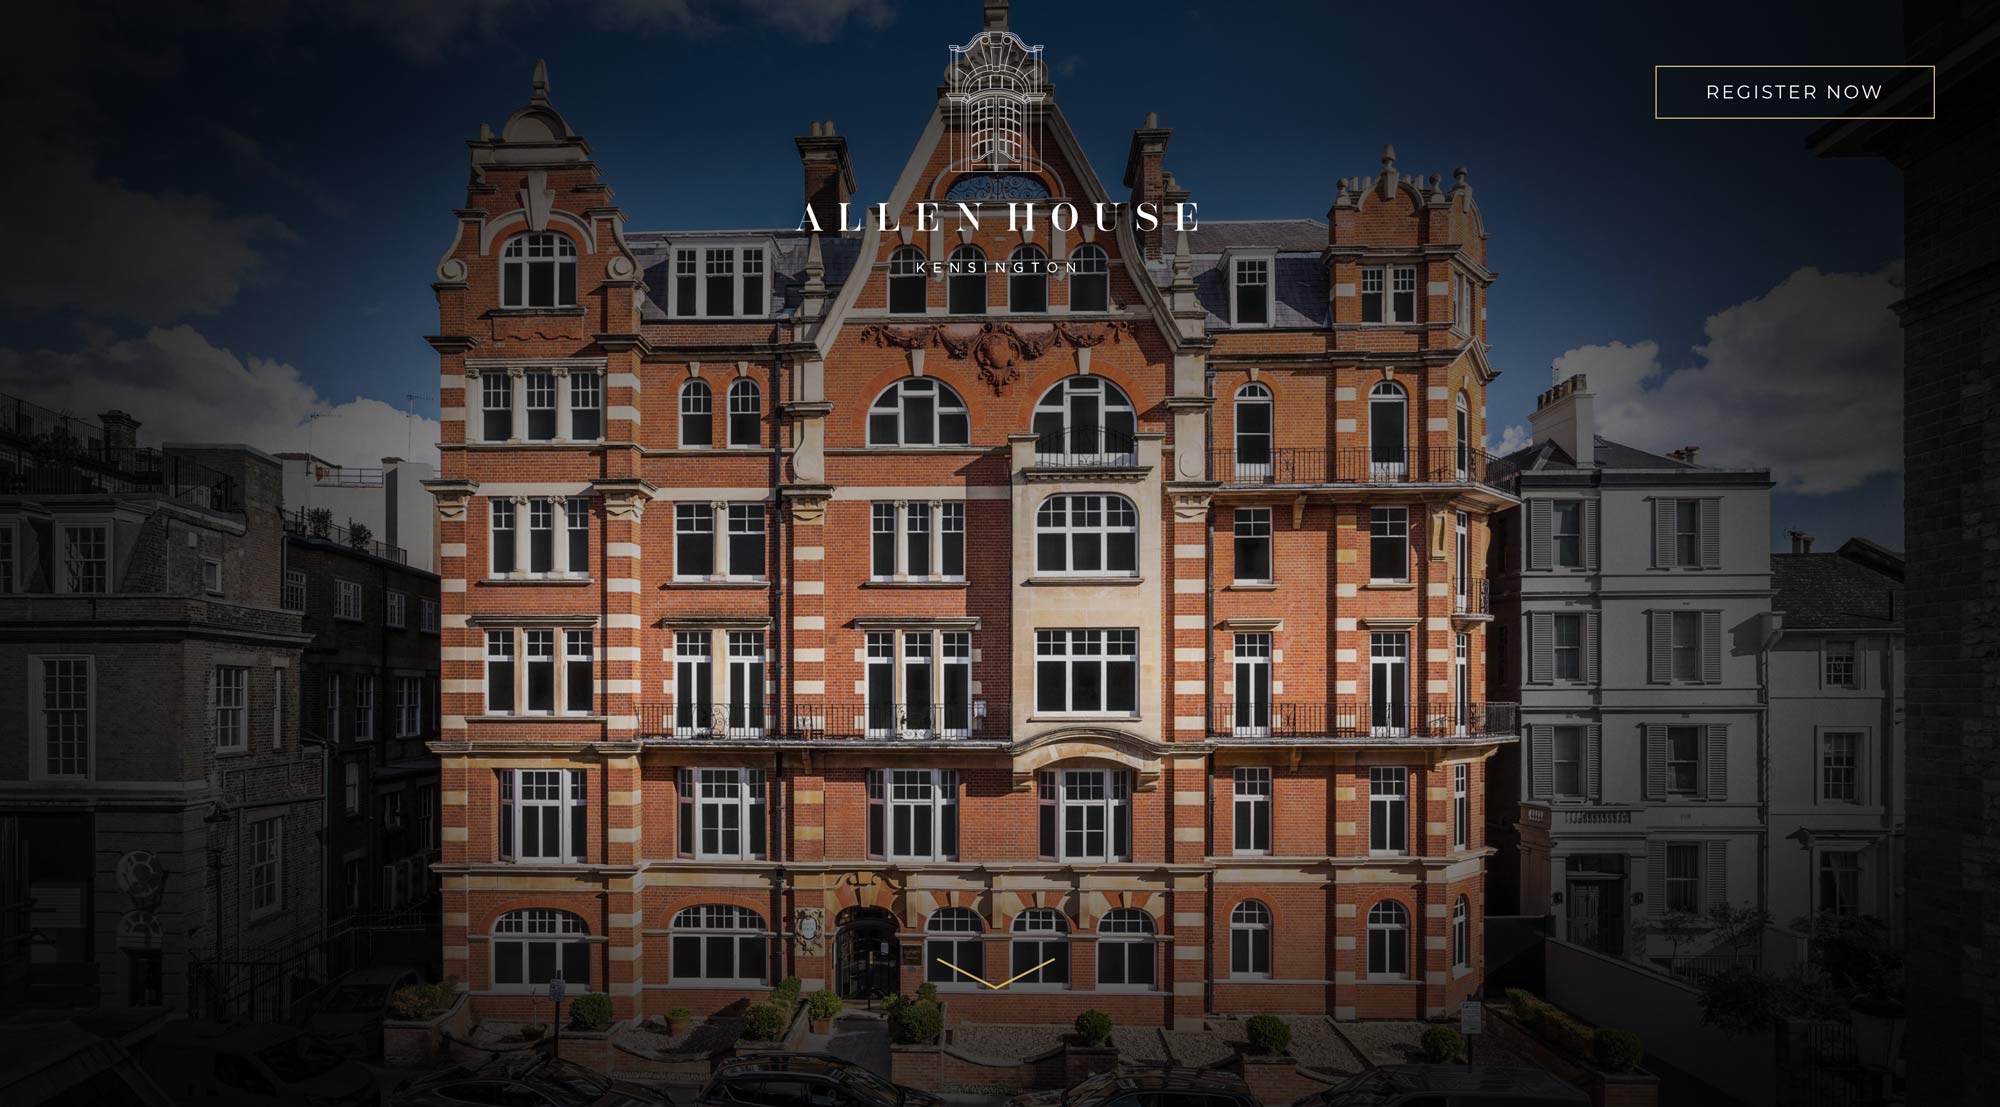 Register your interest now in the new homes at Allen House in Kensington, London W8